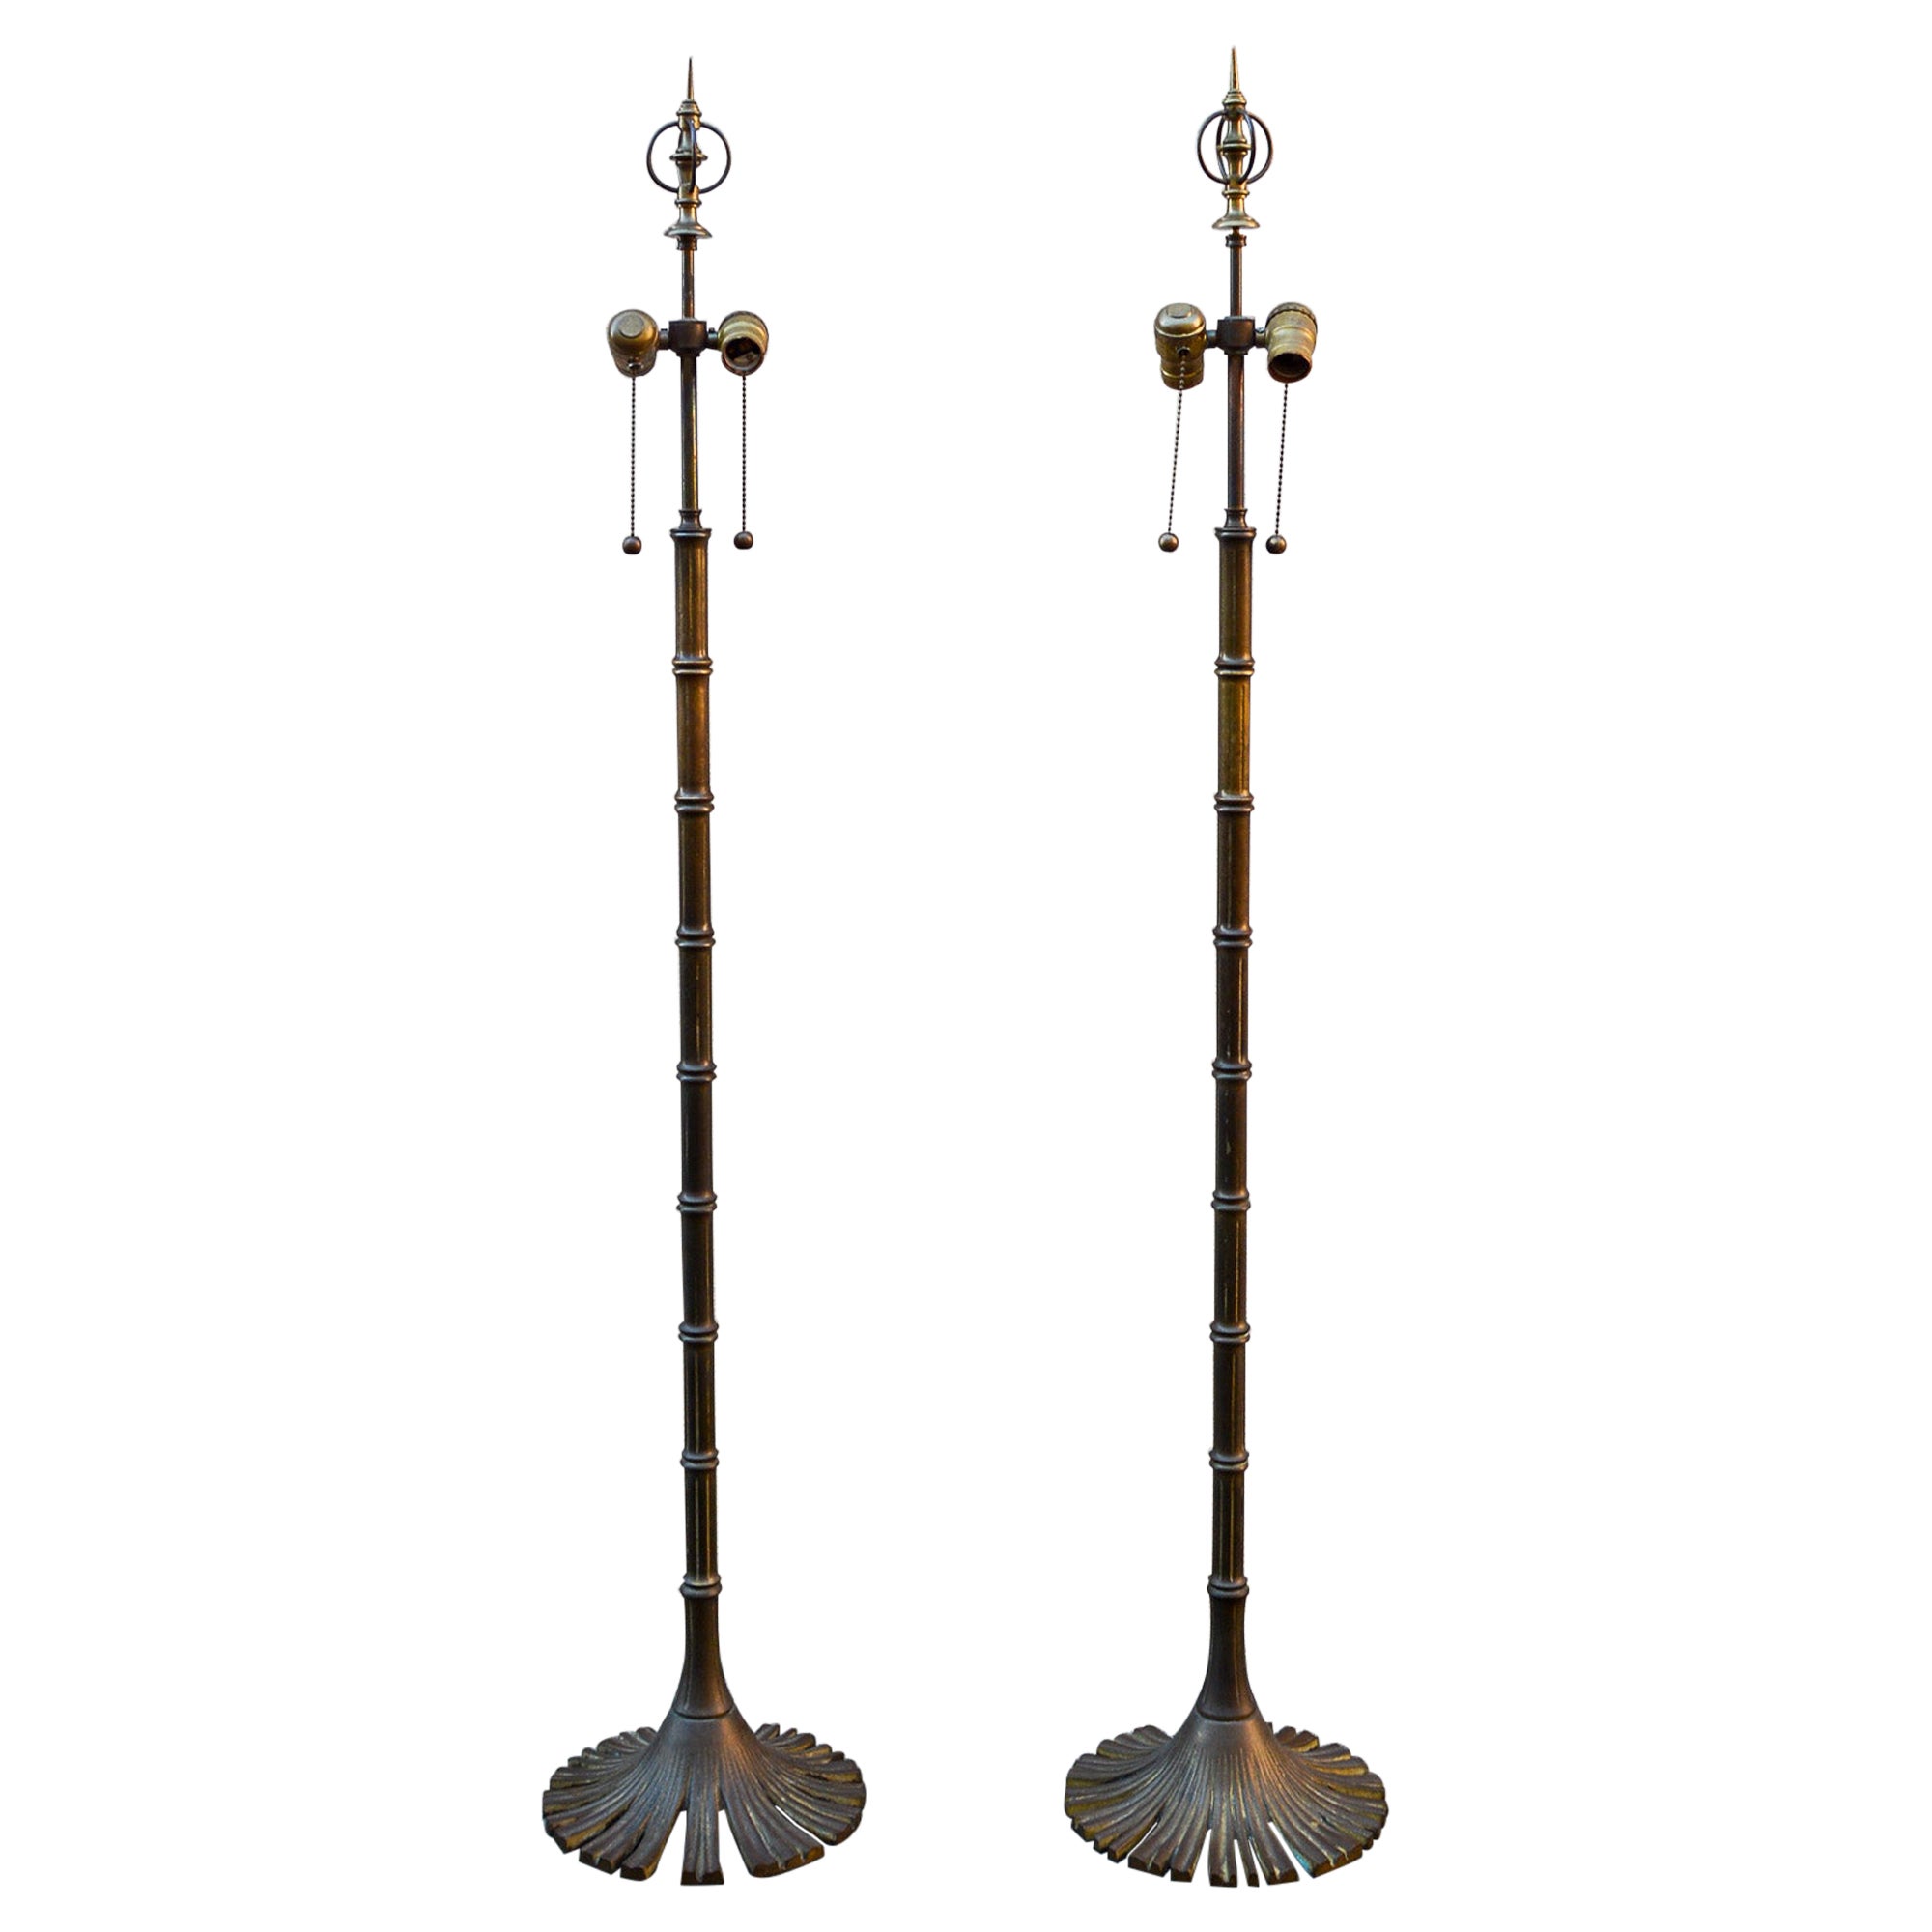 Chapman Manufacturing Company Floor Lamps